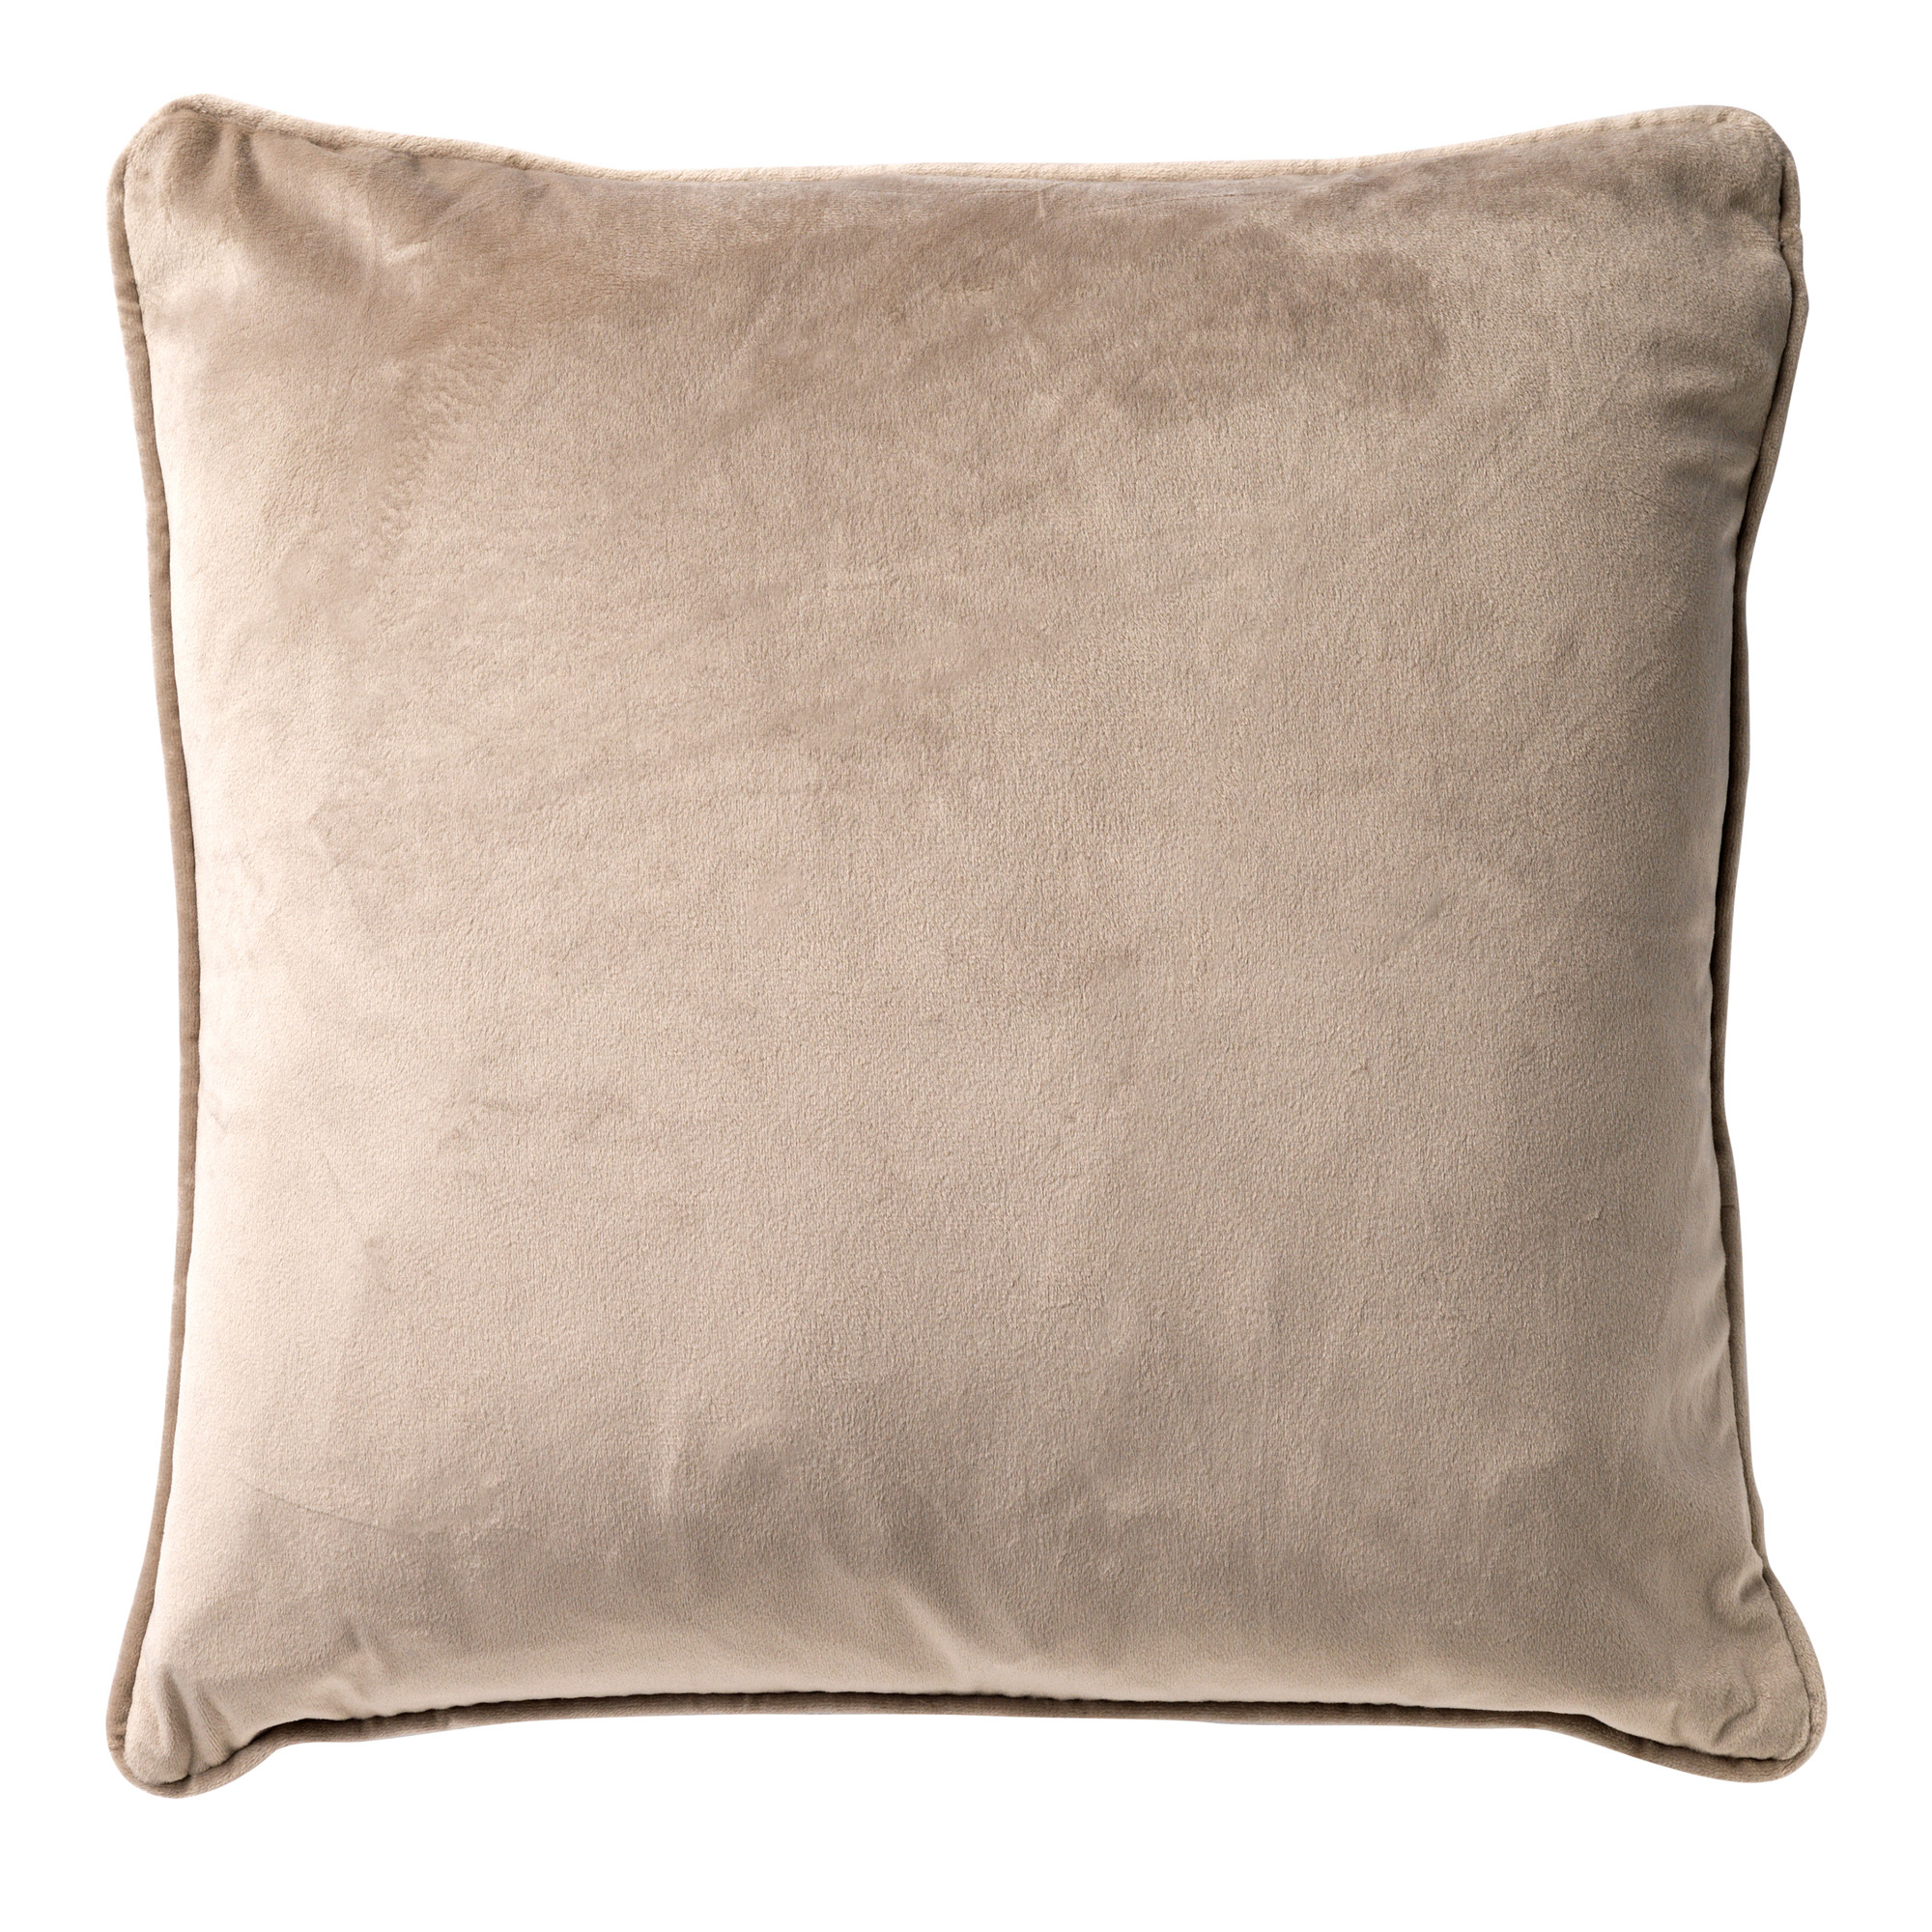 FINNA - Cushion 45x45 cm with cushion cover made of 100% recycled polyester - Eco Line collection - Pumice Stone - beige